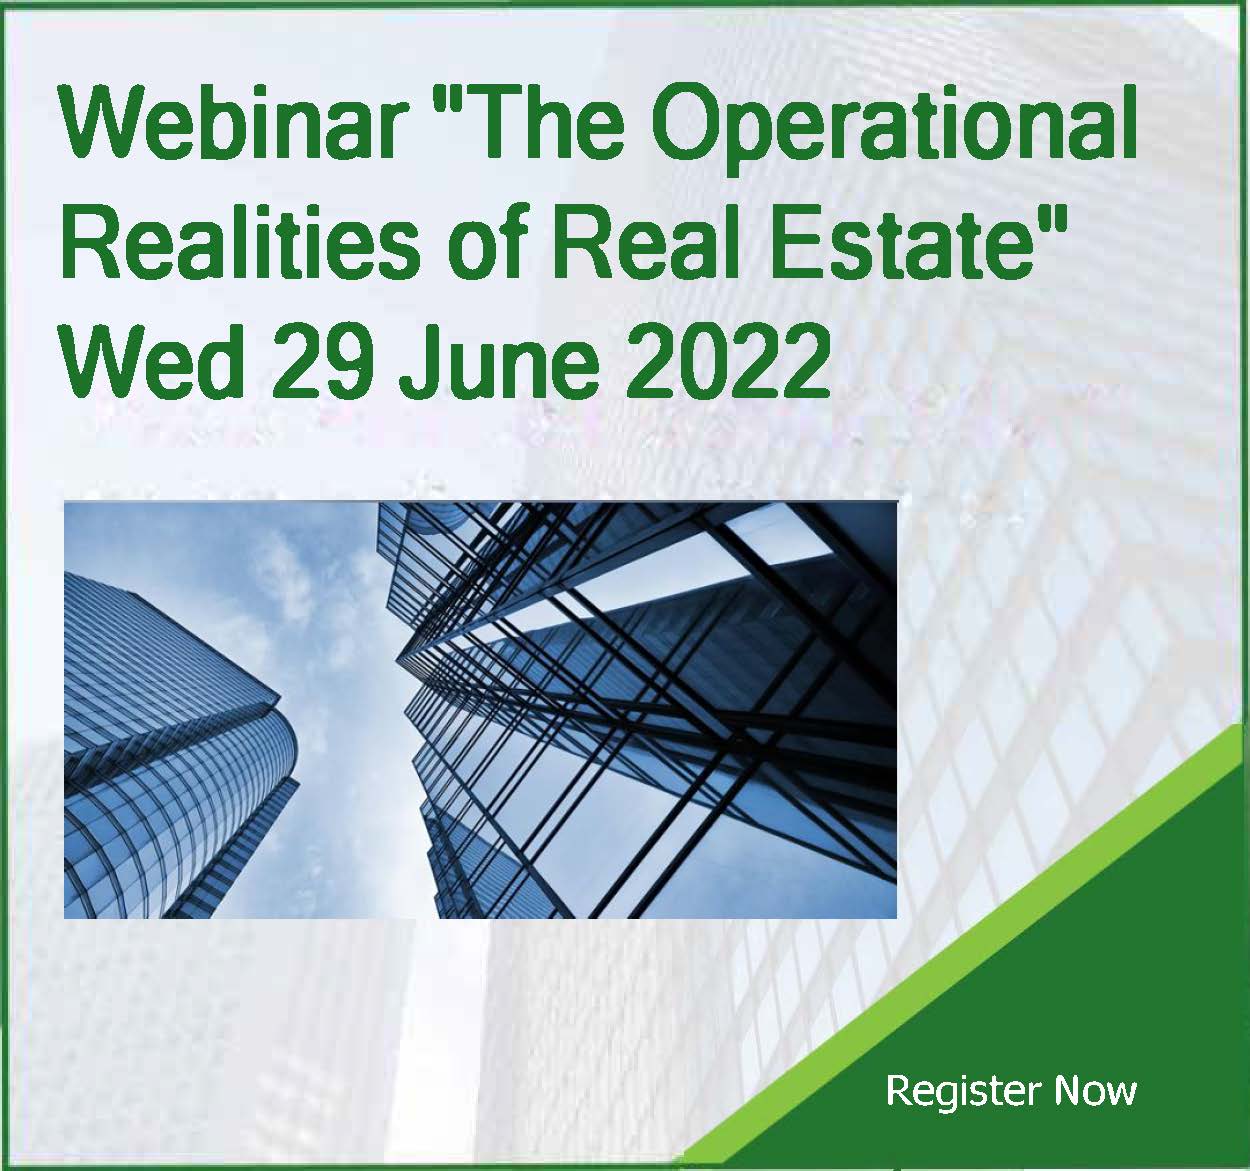 Joint Webinar “The Operational Realities of Real Estate” Wed 29 June 2022